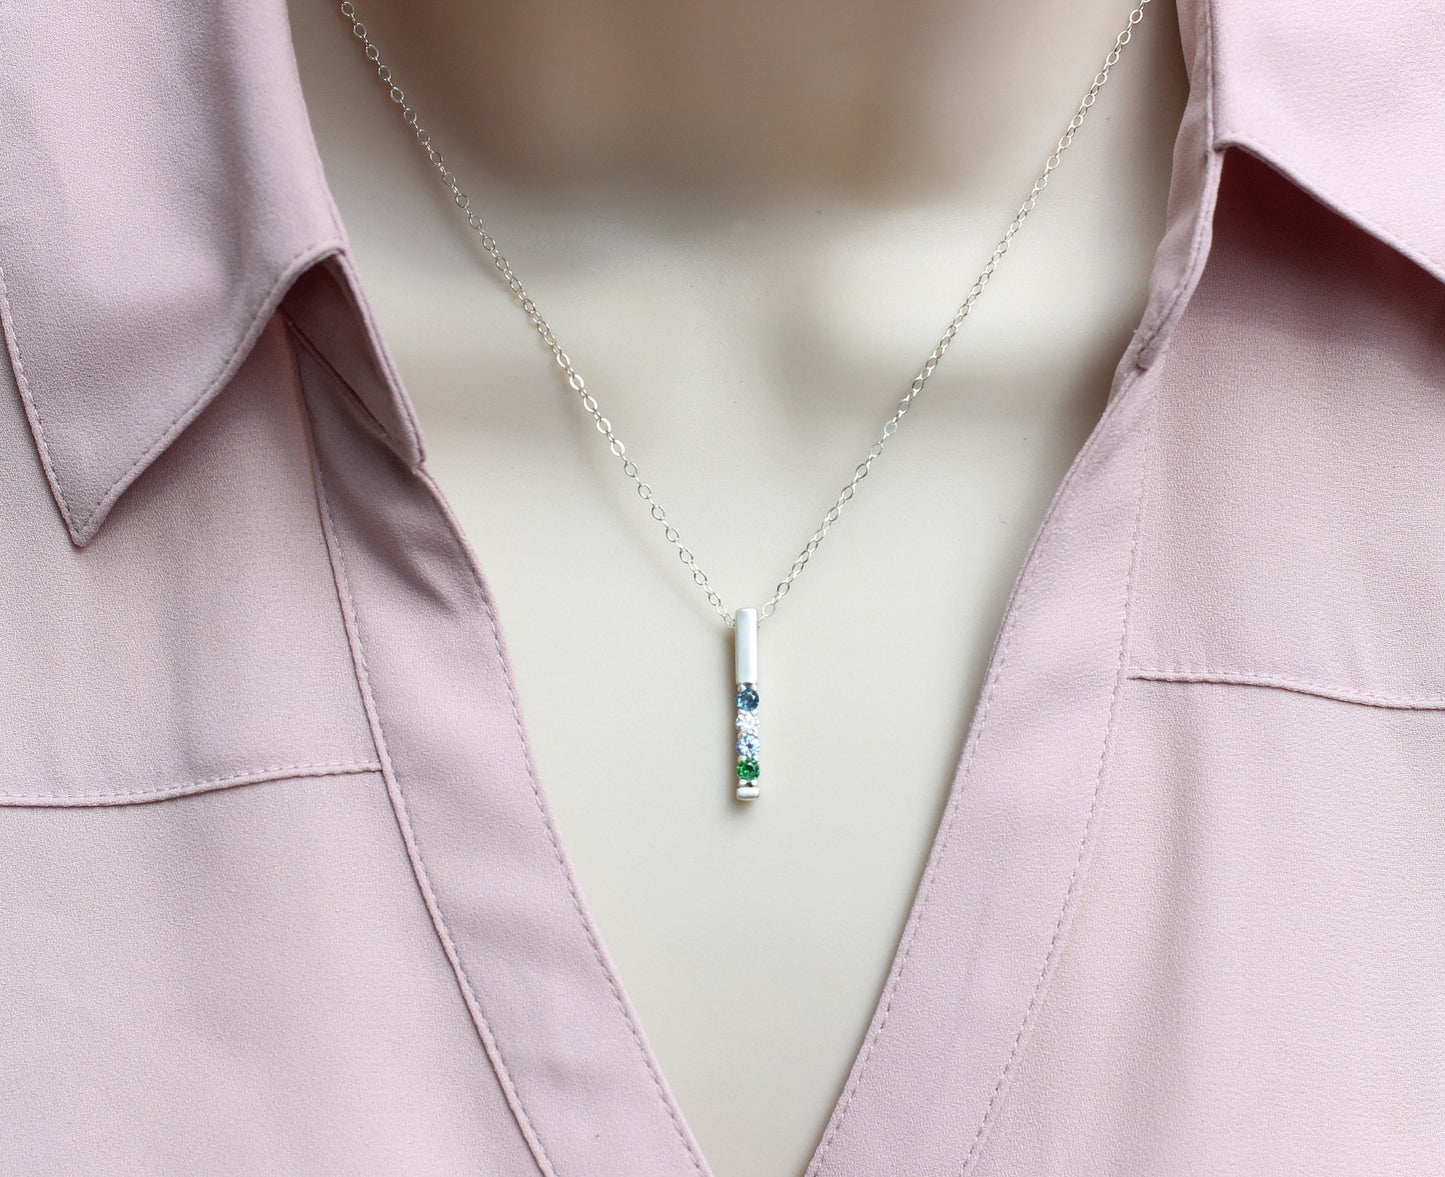 Birthstone Bar Necklace // Satin Finish Sterling Silver or Solid Gold Vertical Bar Gemstone Personalized Necklace // Custom Pendant for Mom